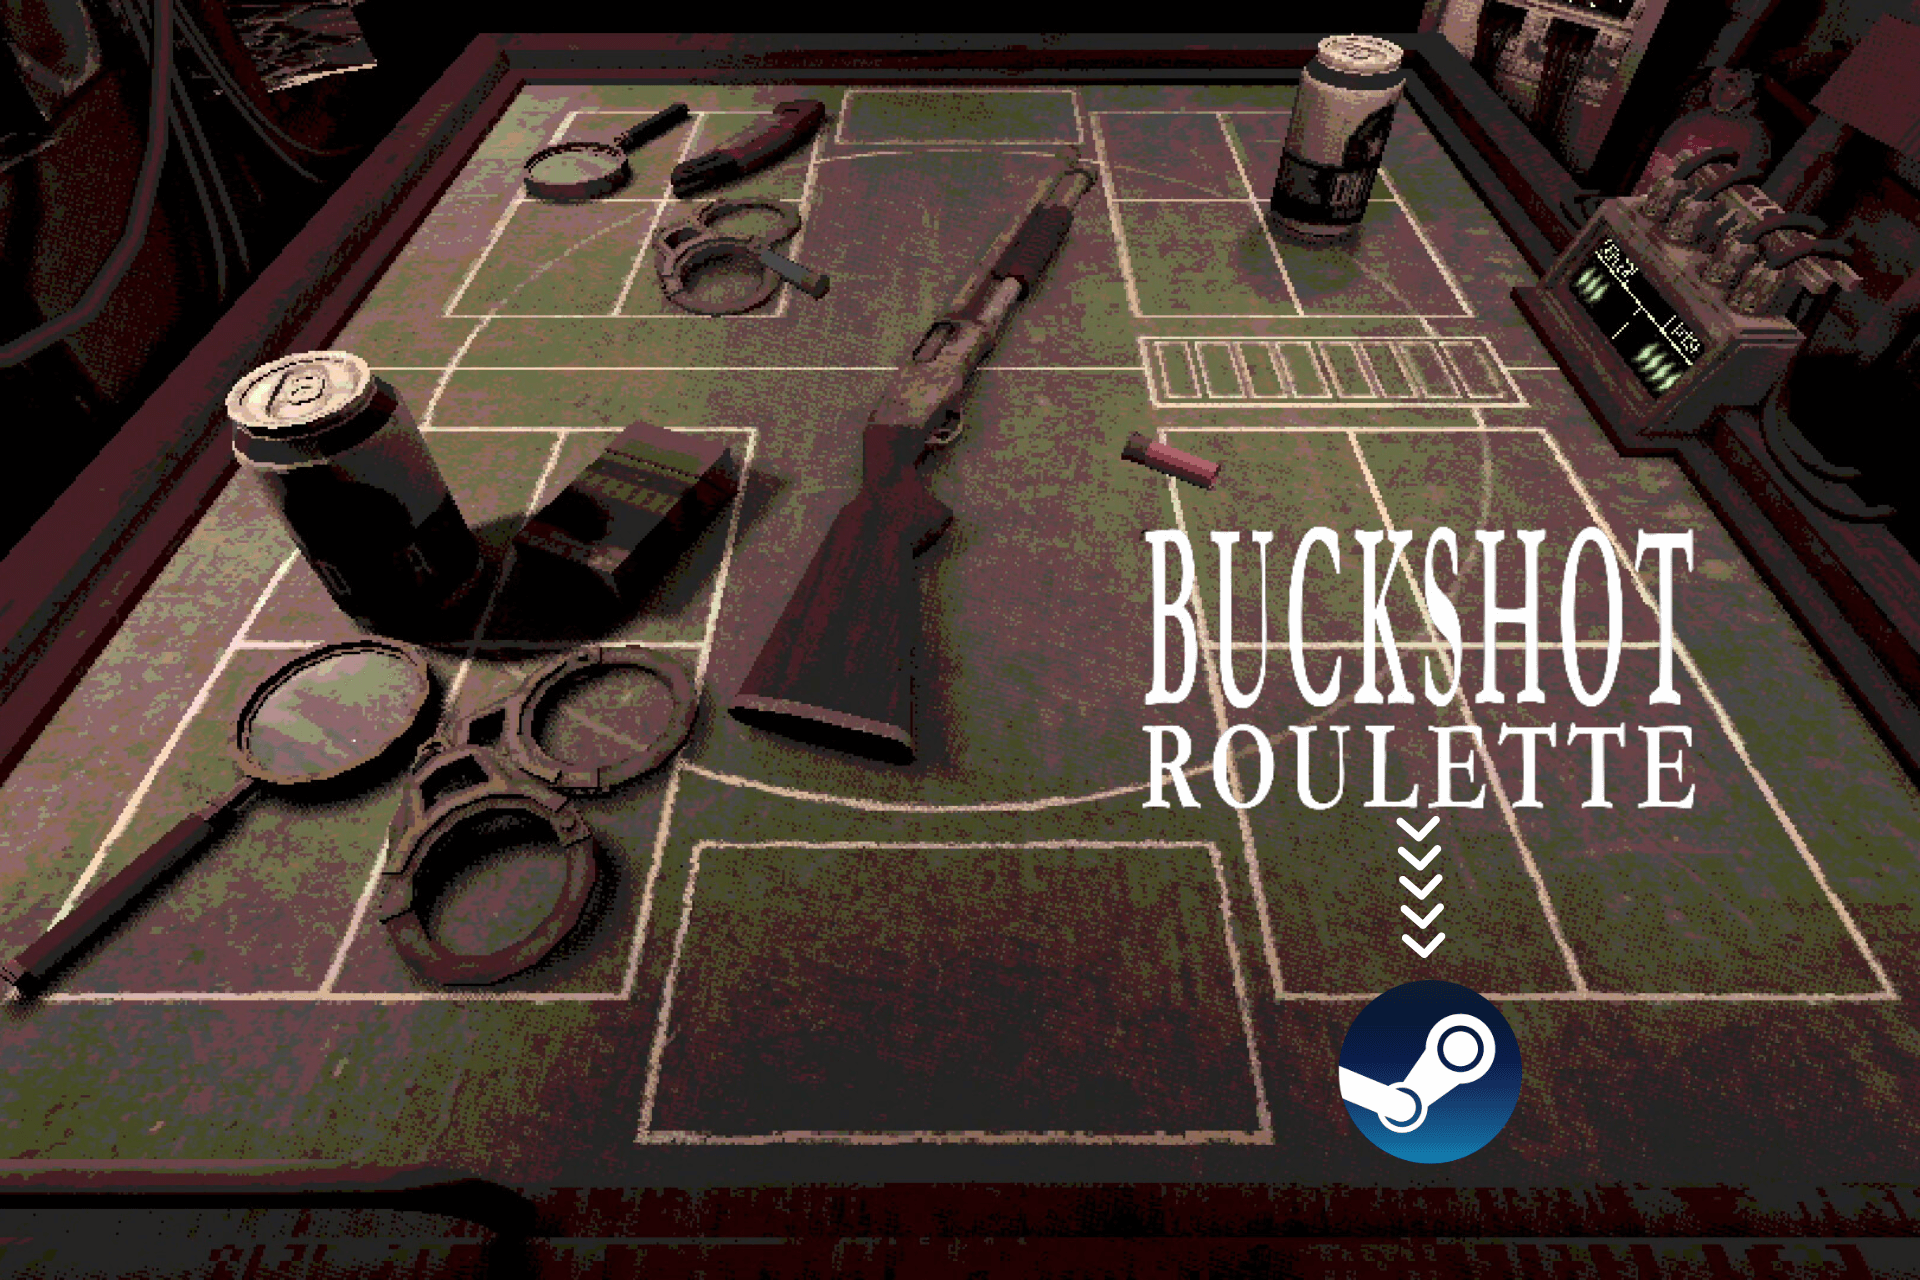 Buckshot Roulette is now available on Steam with a new version and exciting features